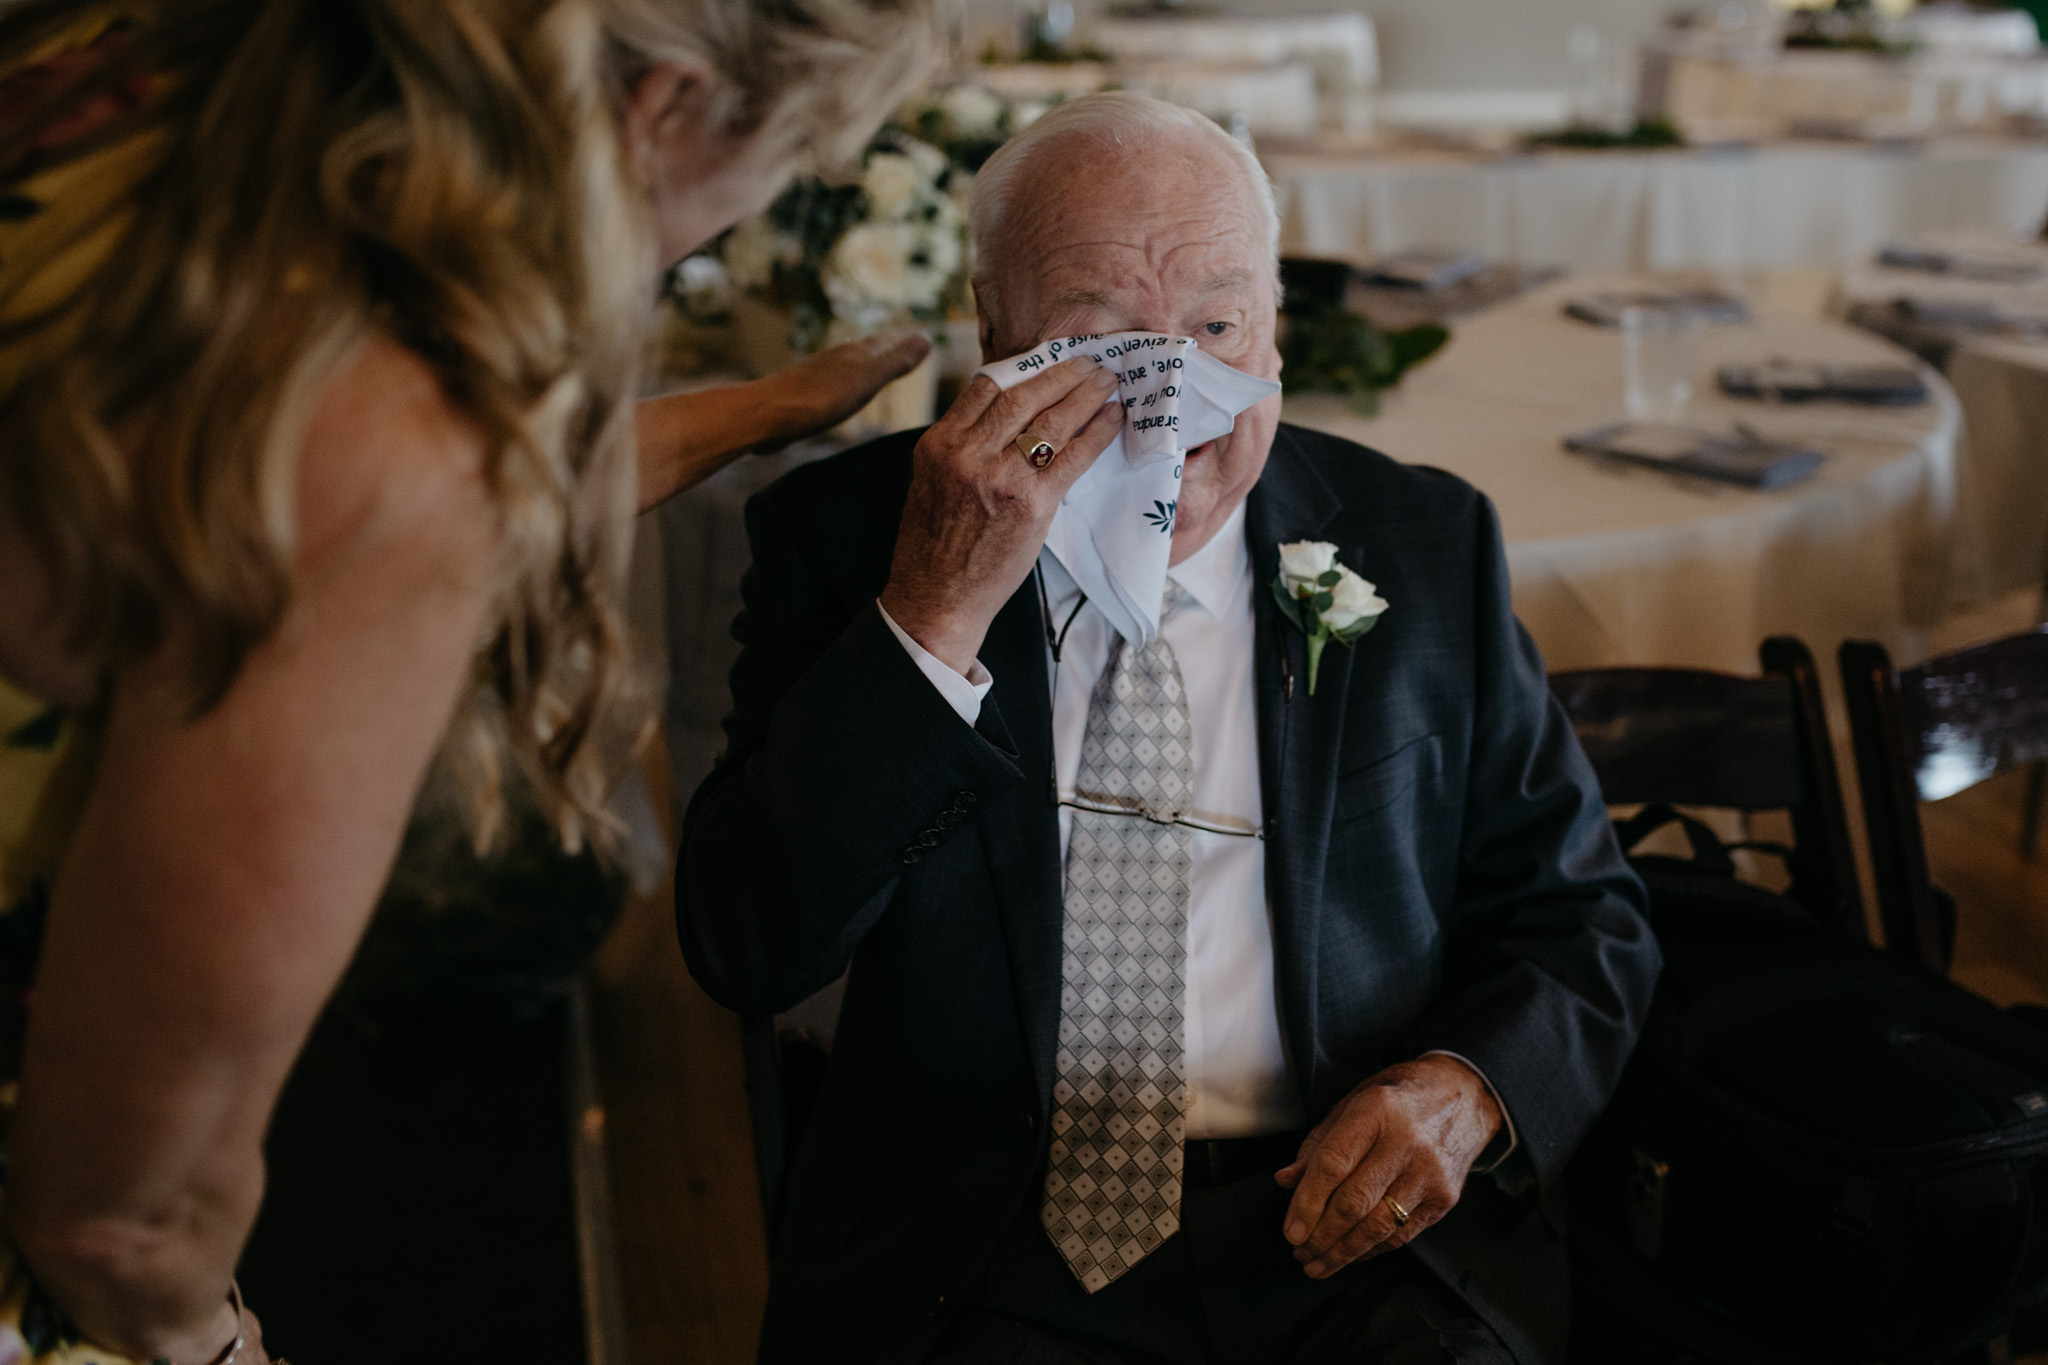 The bride gives her grandpa the sweetest gift during their Indiana wedding